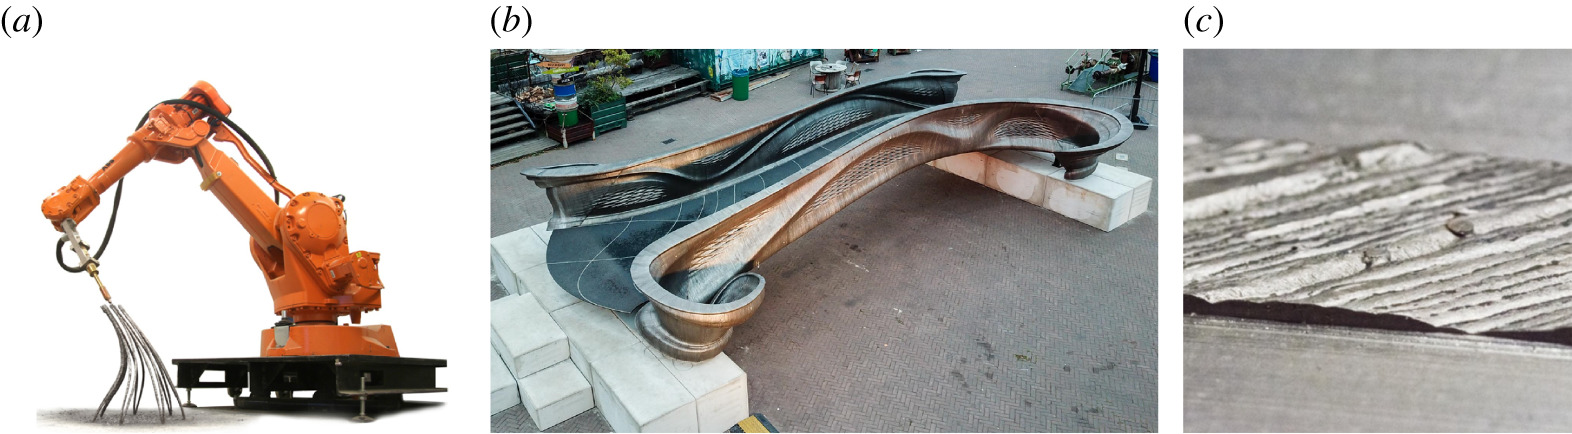 (a) The three-dimensional printing protocol developed by MX3D uses a weld head attached to a robotic arm (image by Joris Laarman, www.jorislaarman.com). (b) Pedestrian bridge manufactured using three-dimensional-printed steel. (c) Close-up of the geometric variation on the surface of the material. (Online version in color.)